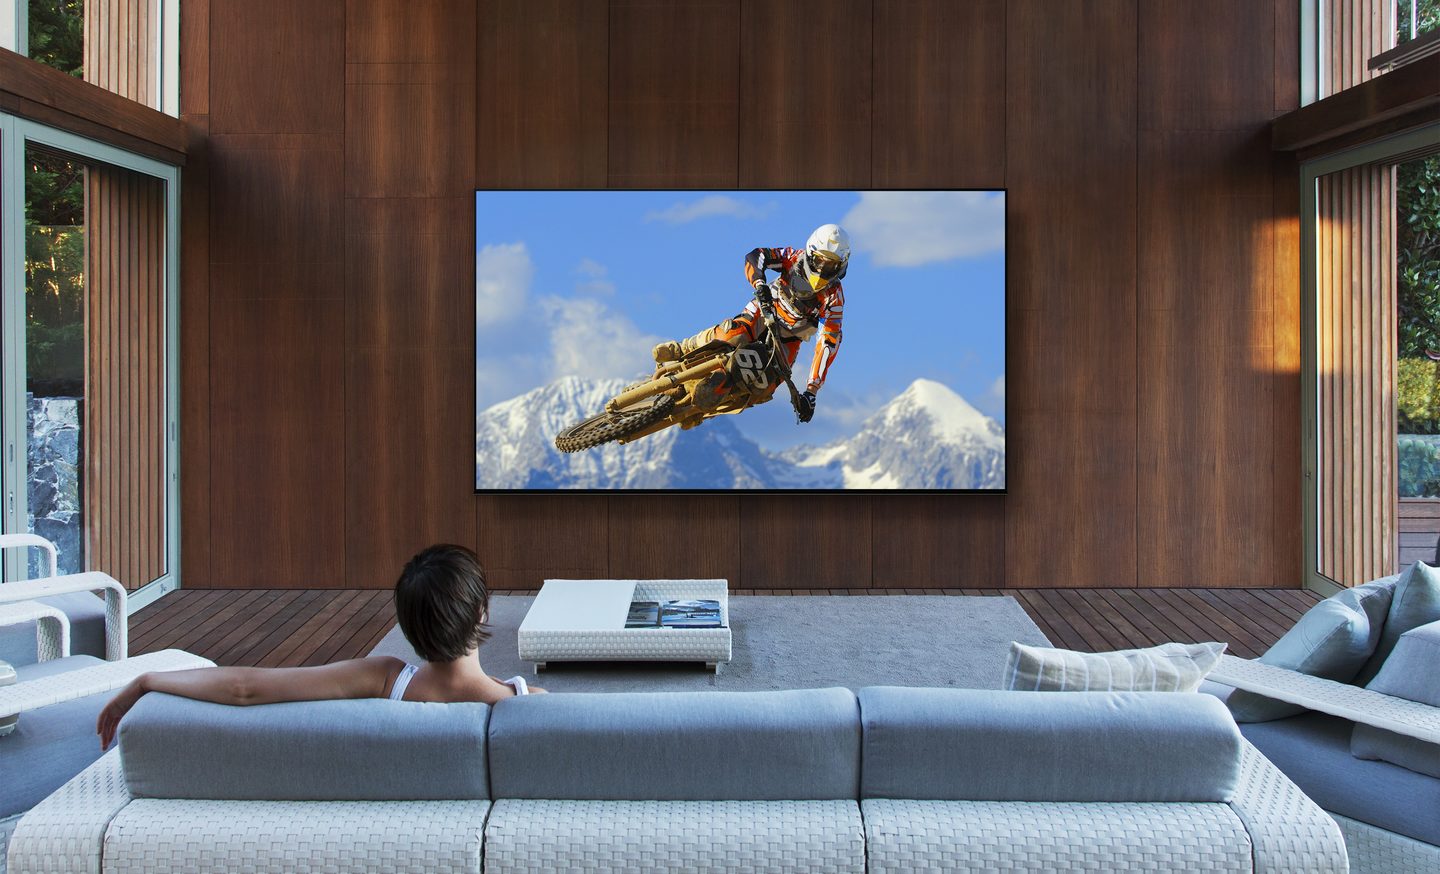 Sony TVs 2019: All Models with Pricing | Tom's Guide